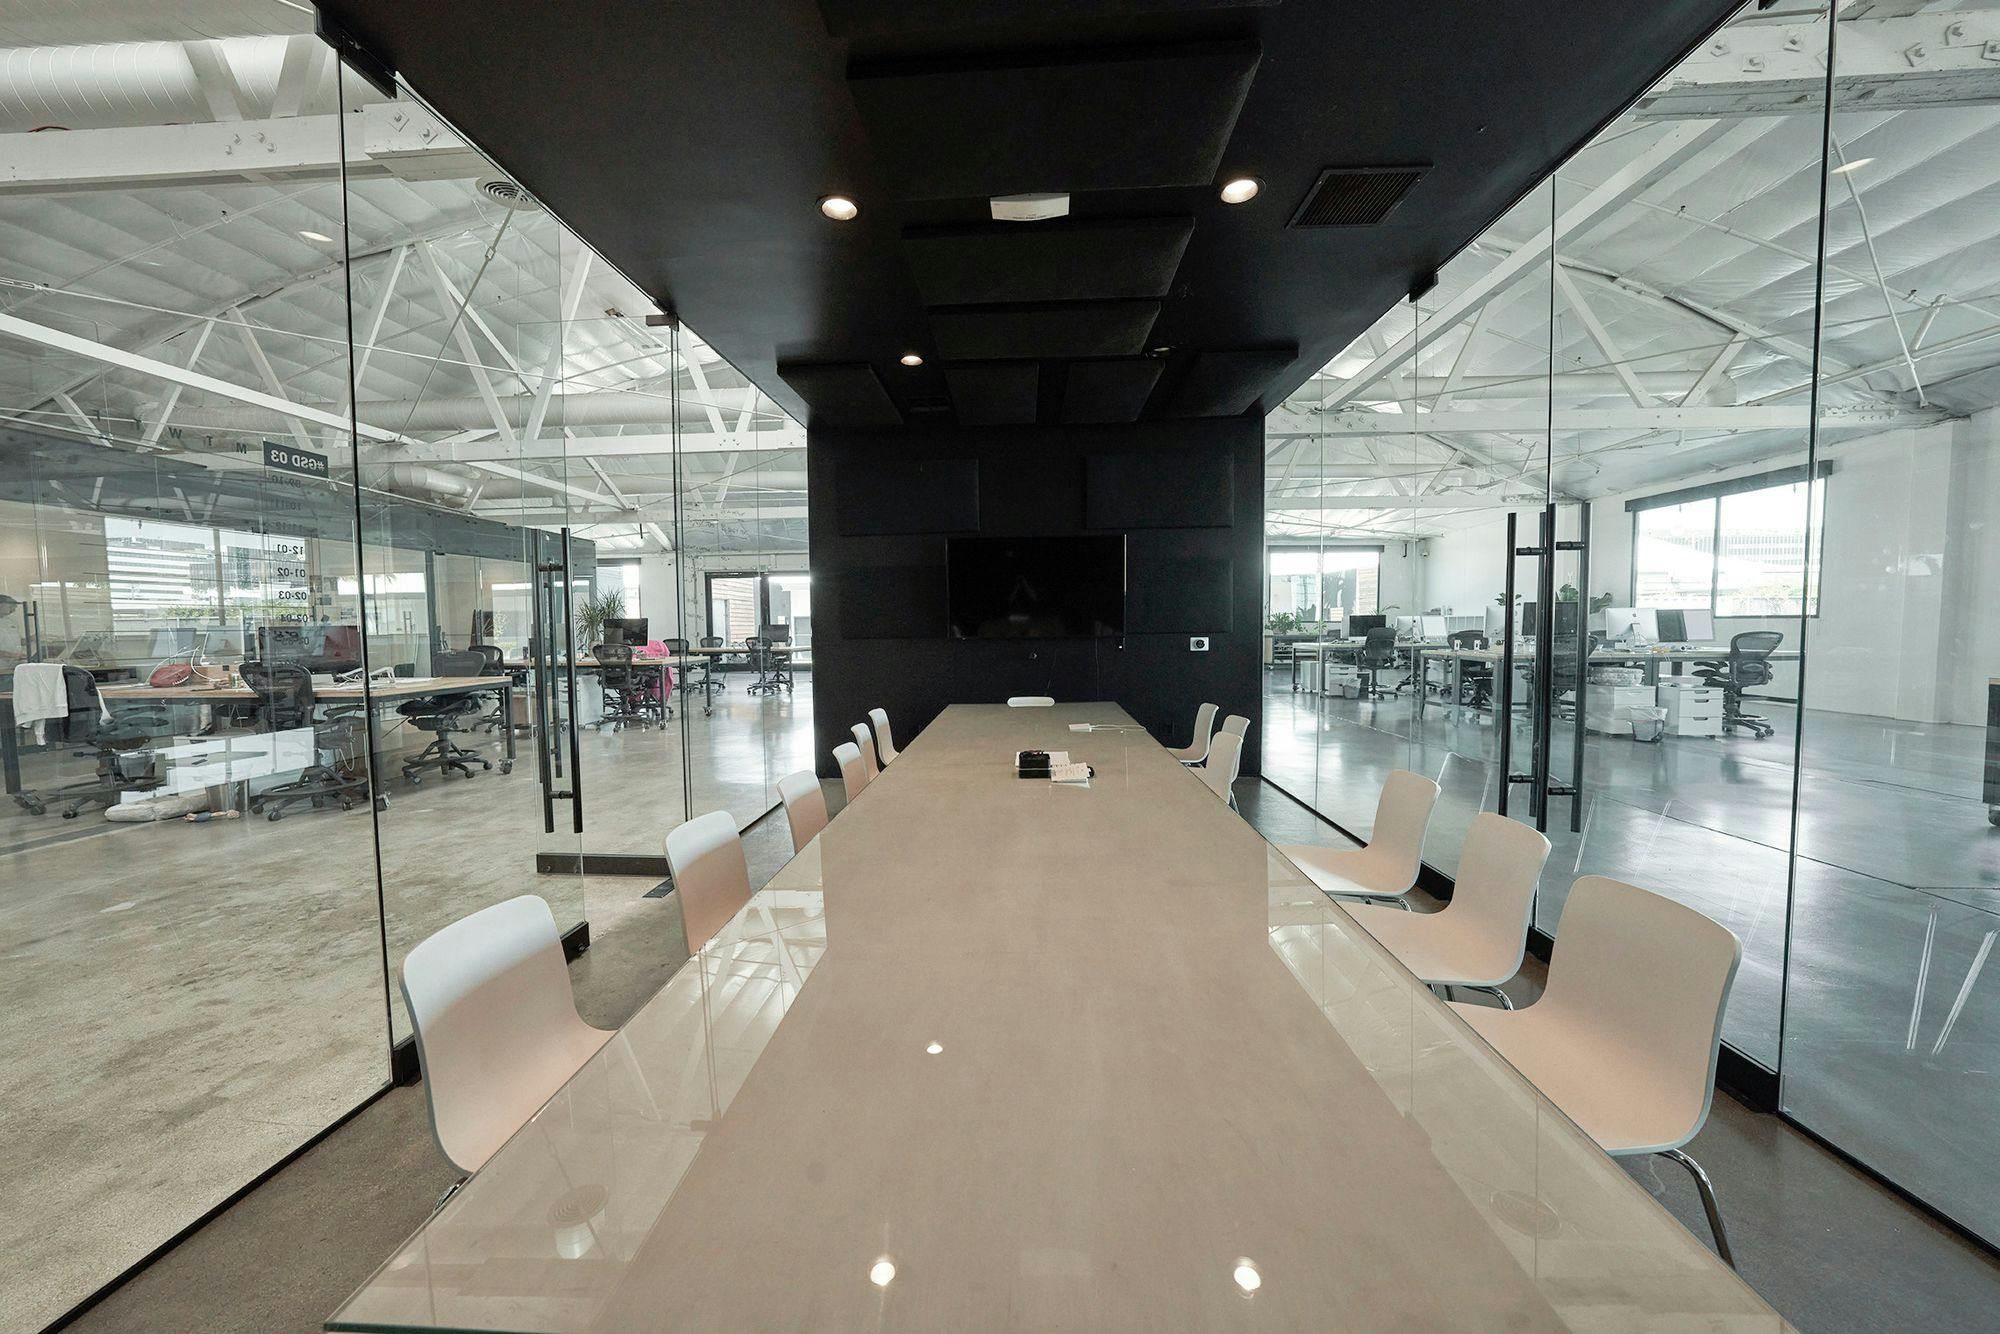 A modern conference room with a long table and chairs, glass walls, and a view into a workspace with desks and computers.